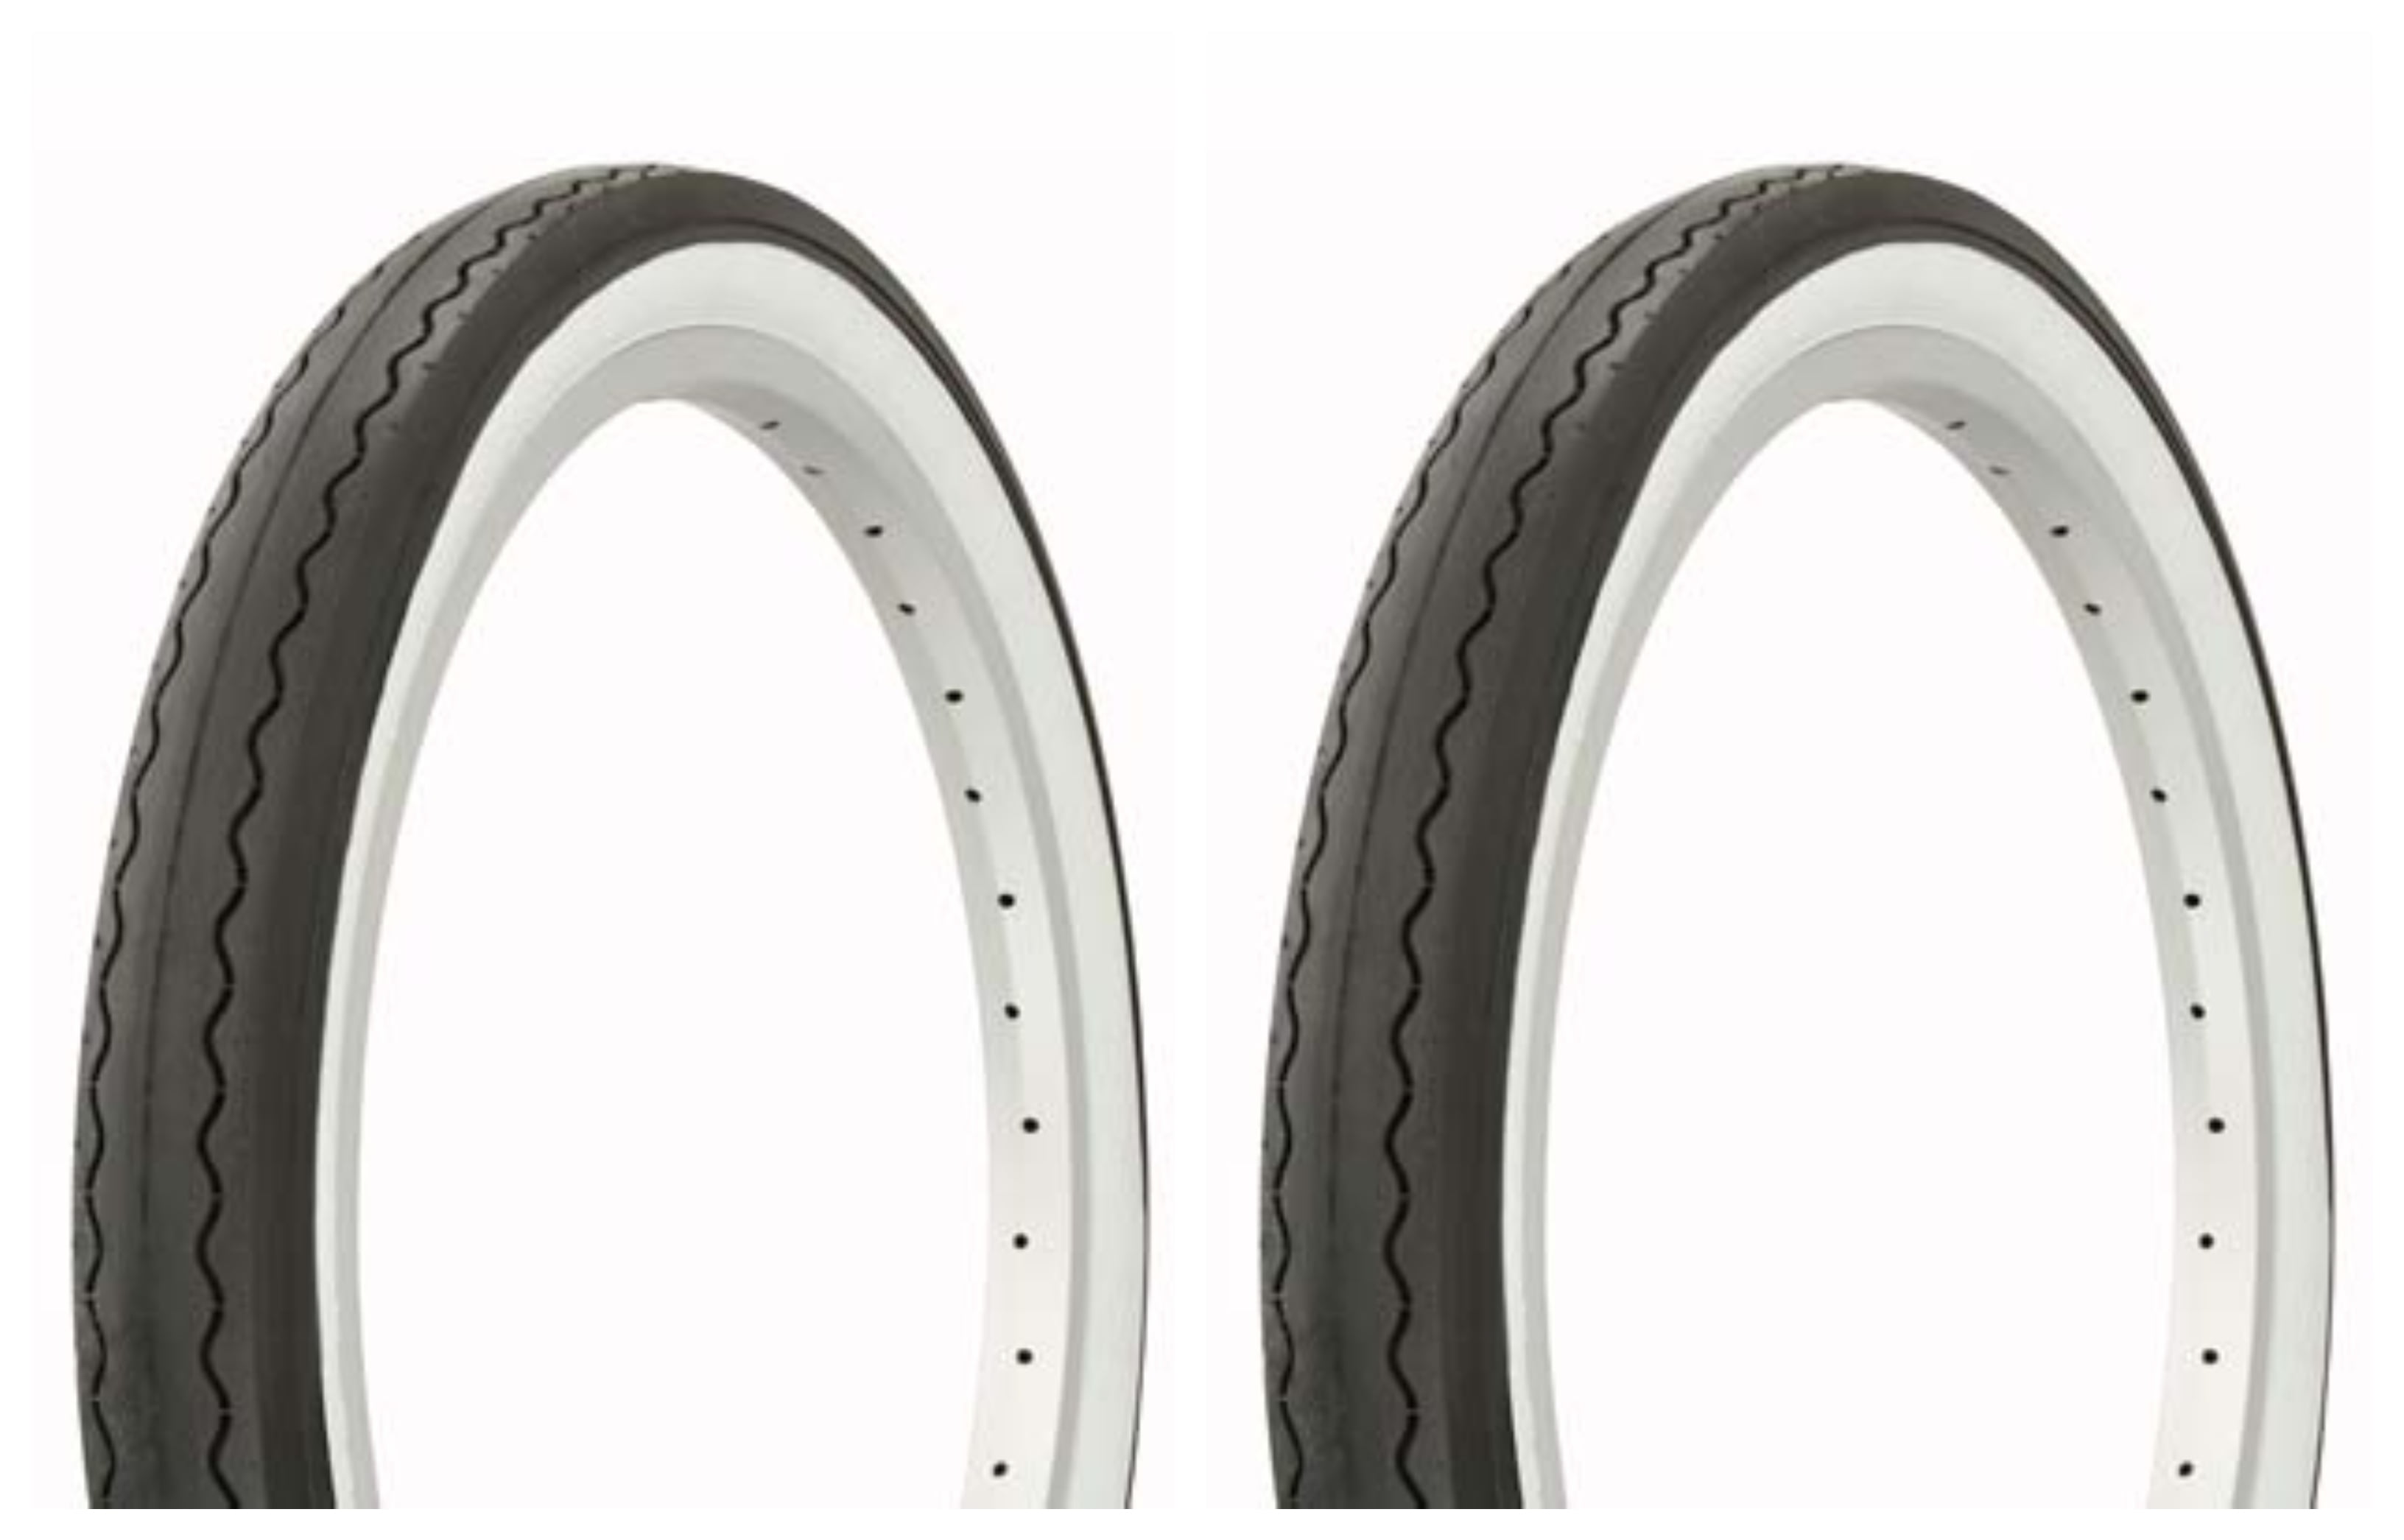 NEW ORIGINAL BICYCLE DURO TIRE IN 20 X 2.125 BLACK/WHITE SIDE WALL HF-851. 